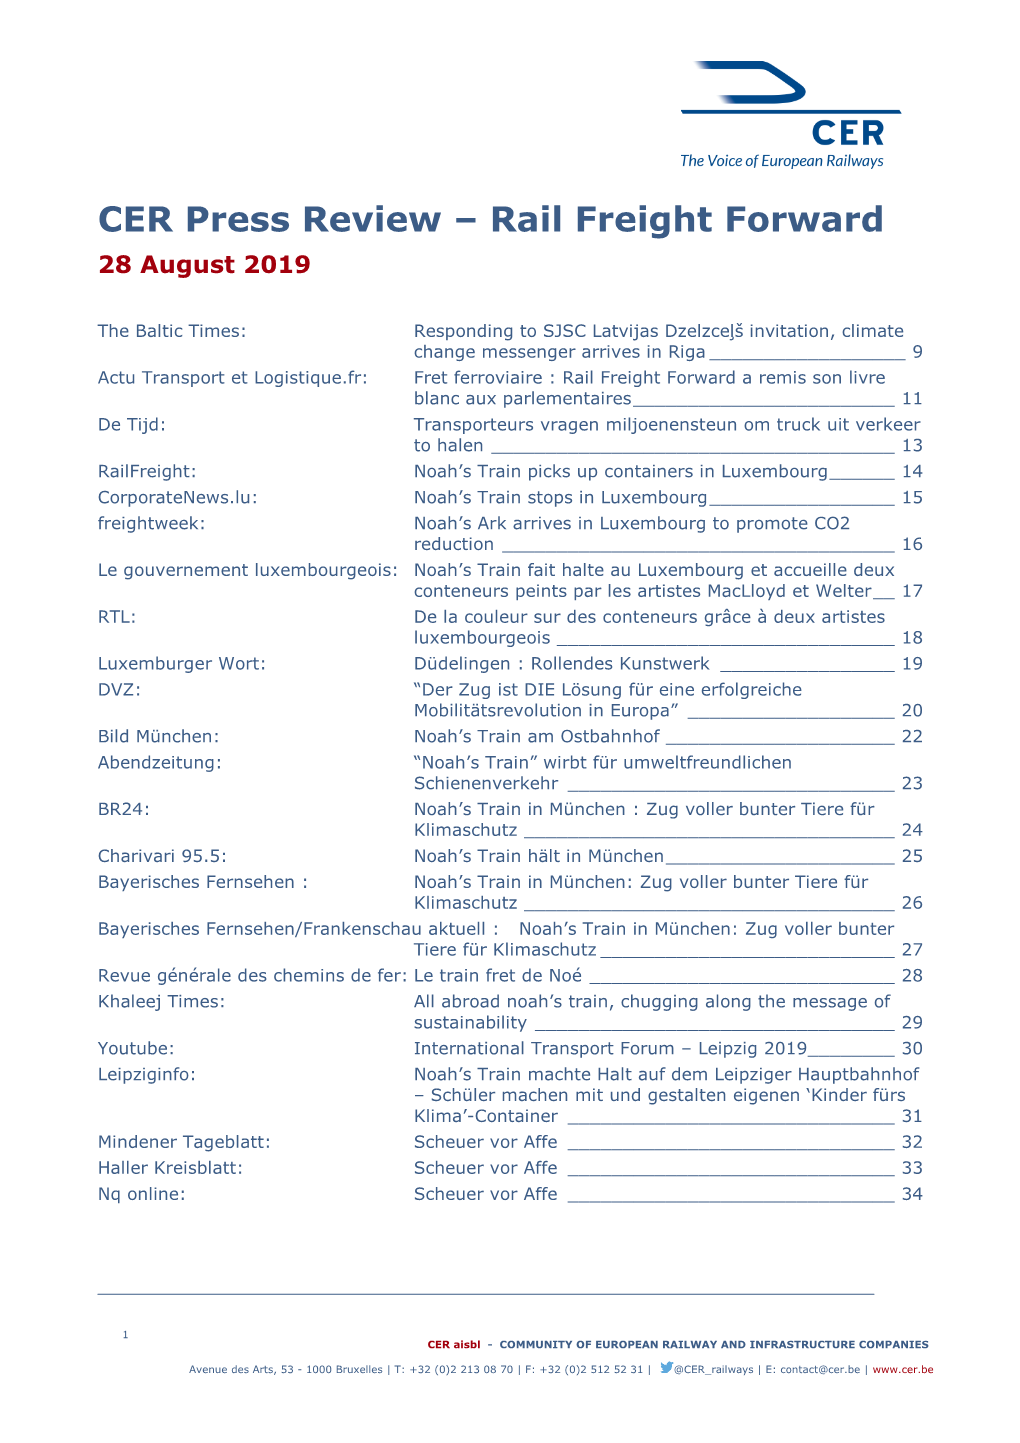 CER Press Review – Rail Freight Forward 28 August 2019